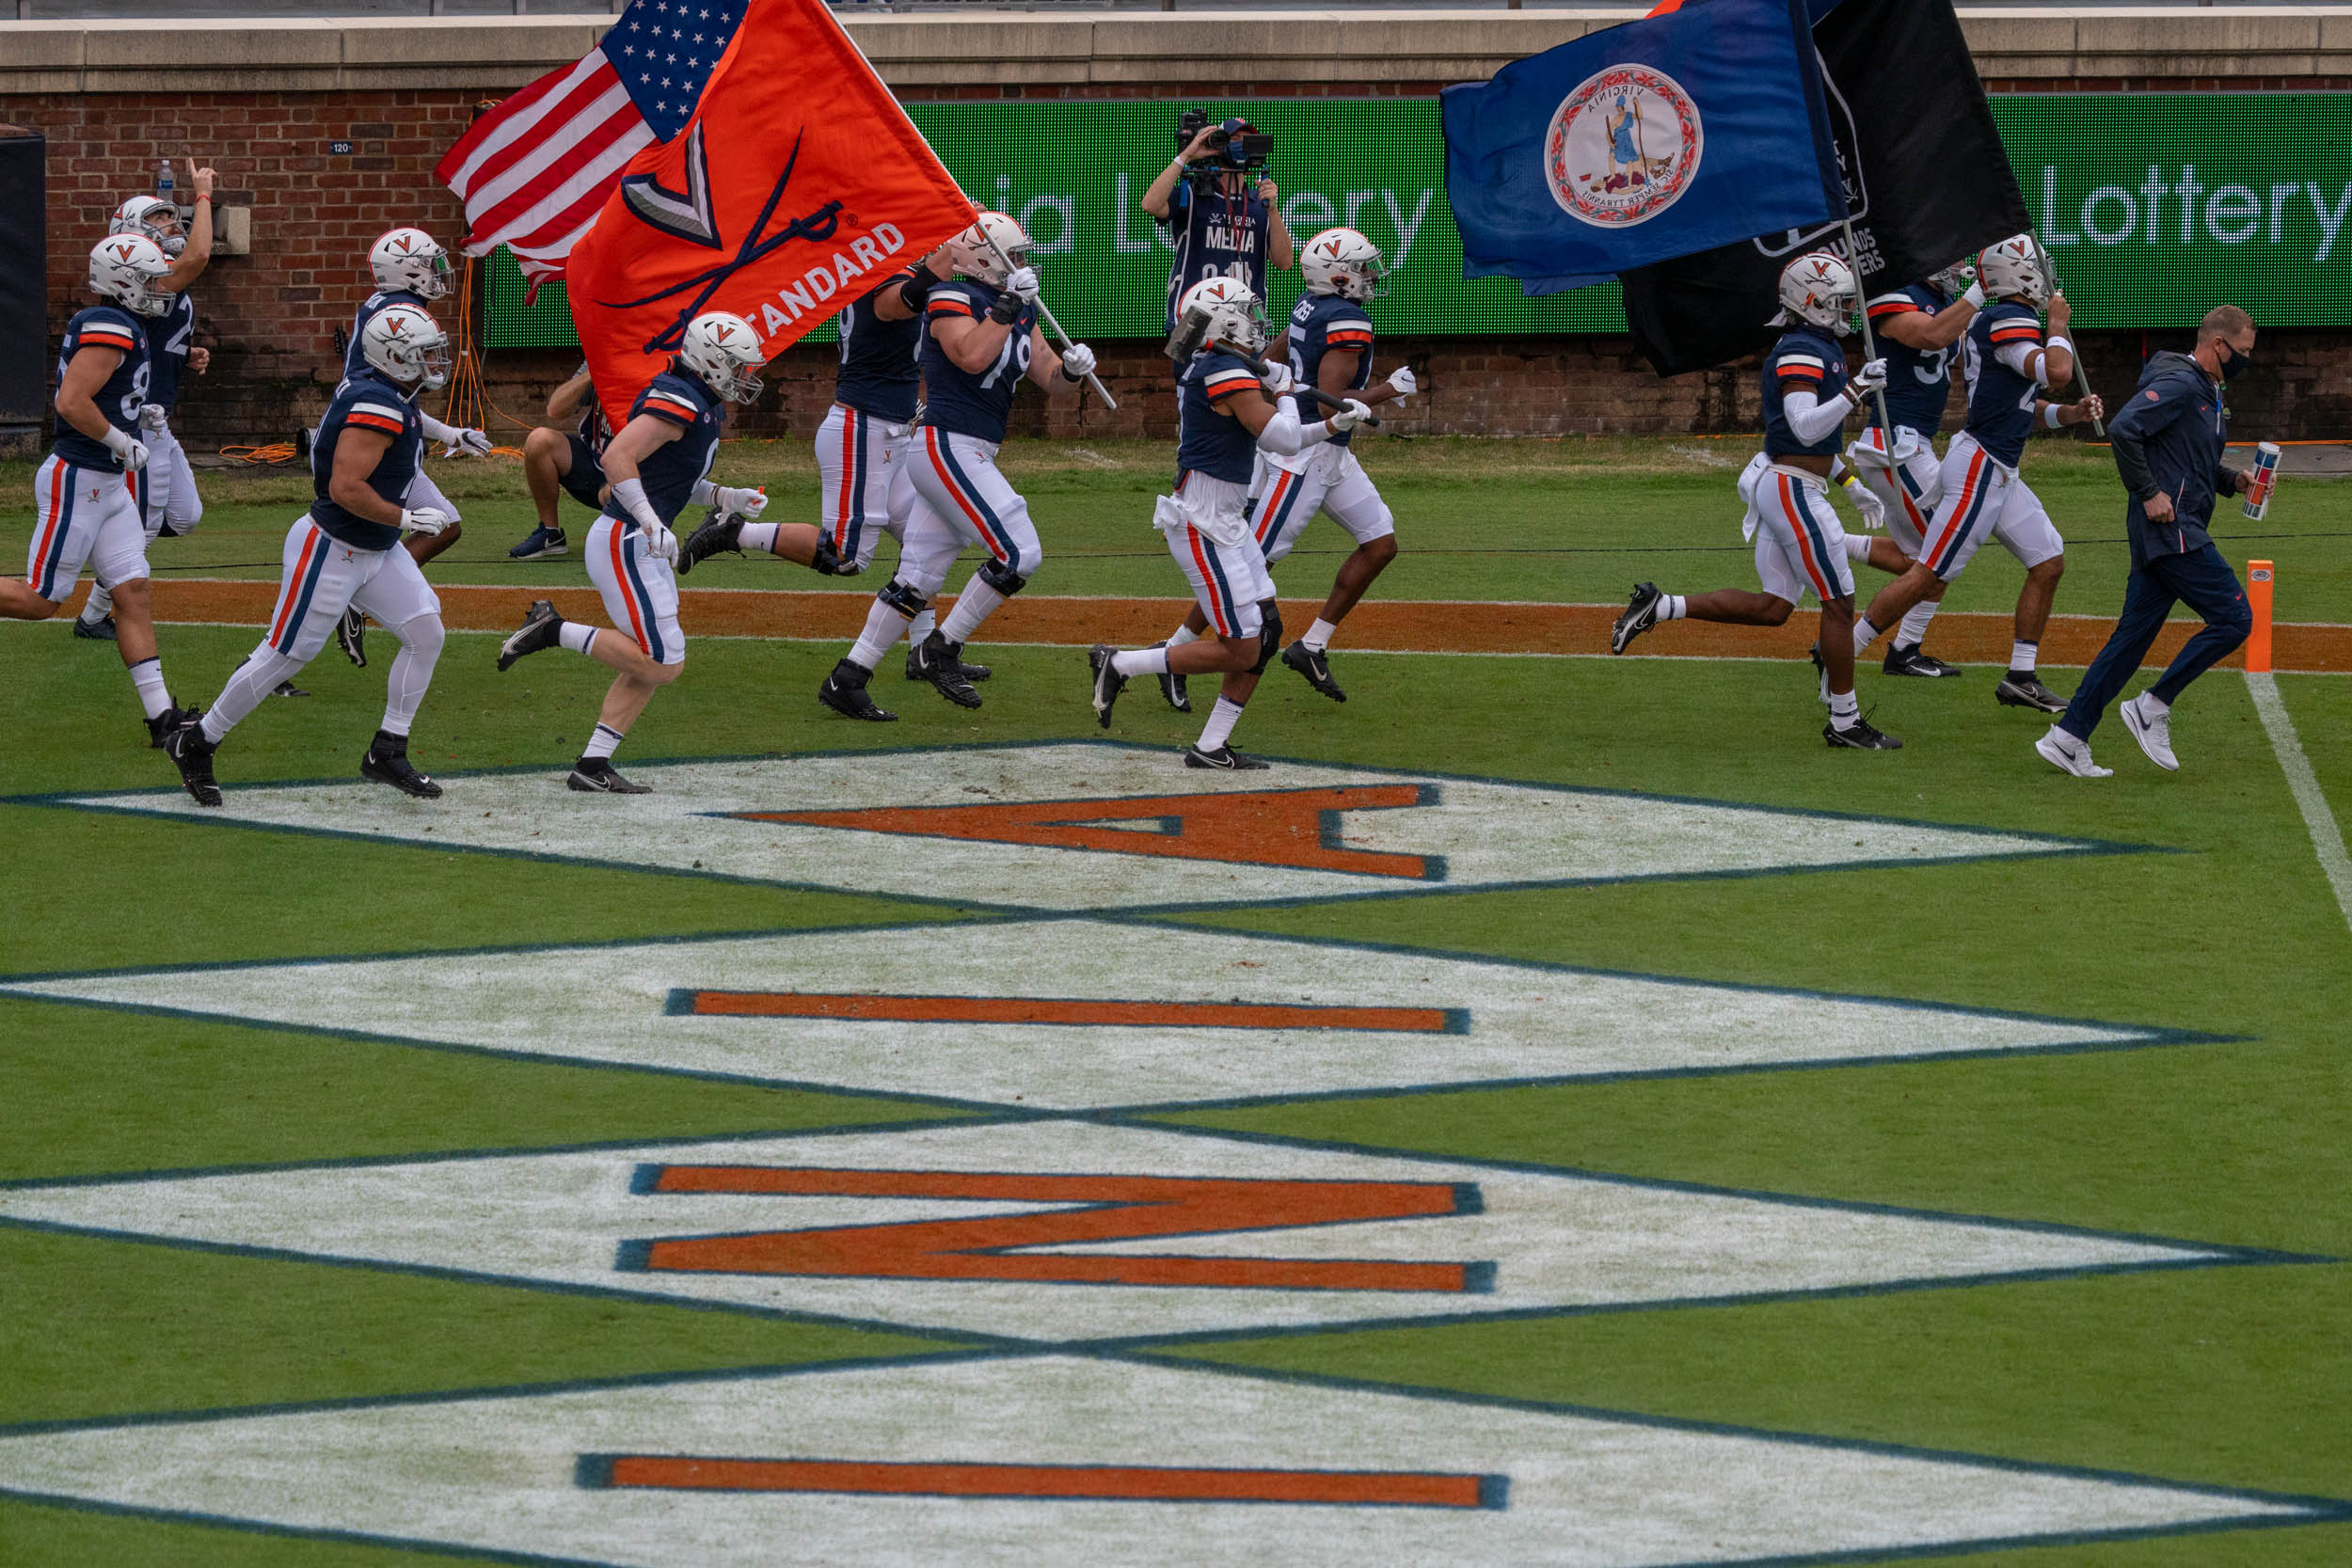 UVA Football team running on the field with the American flag and UVA flag